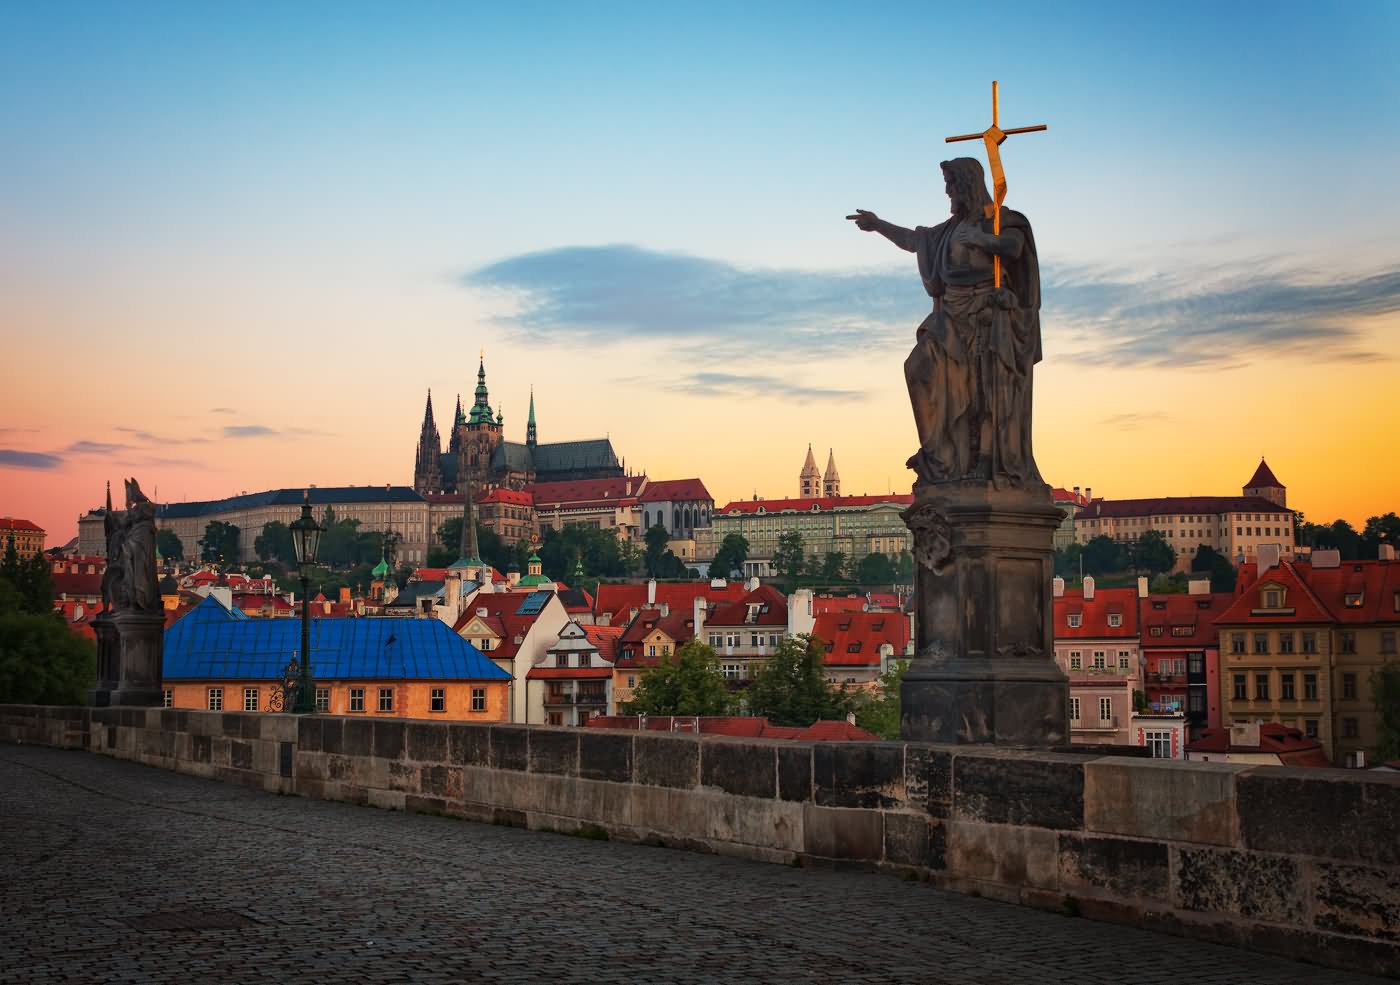 Statue On The Charles Bridge In Prague During Sunset